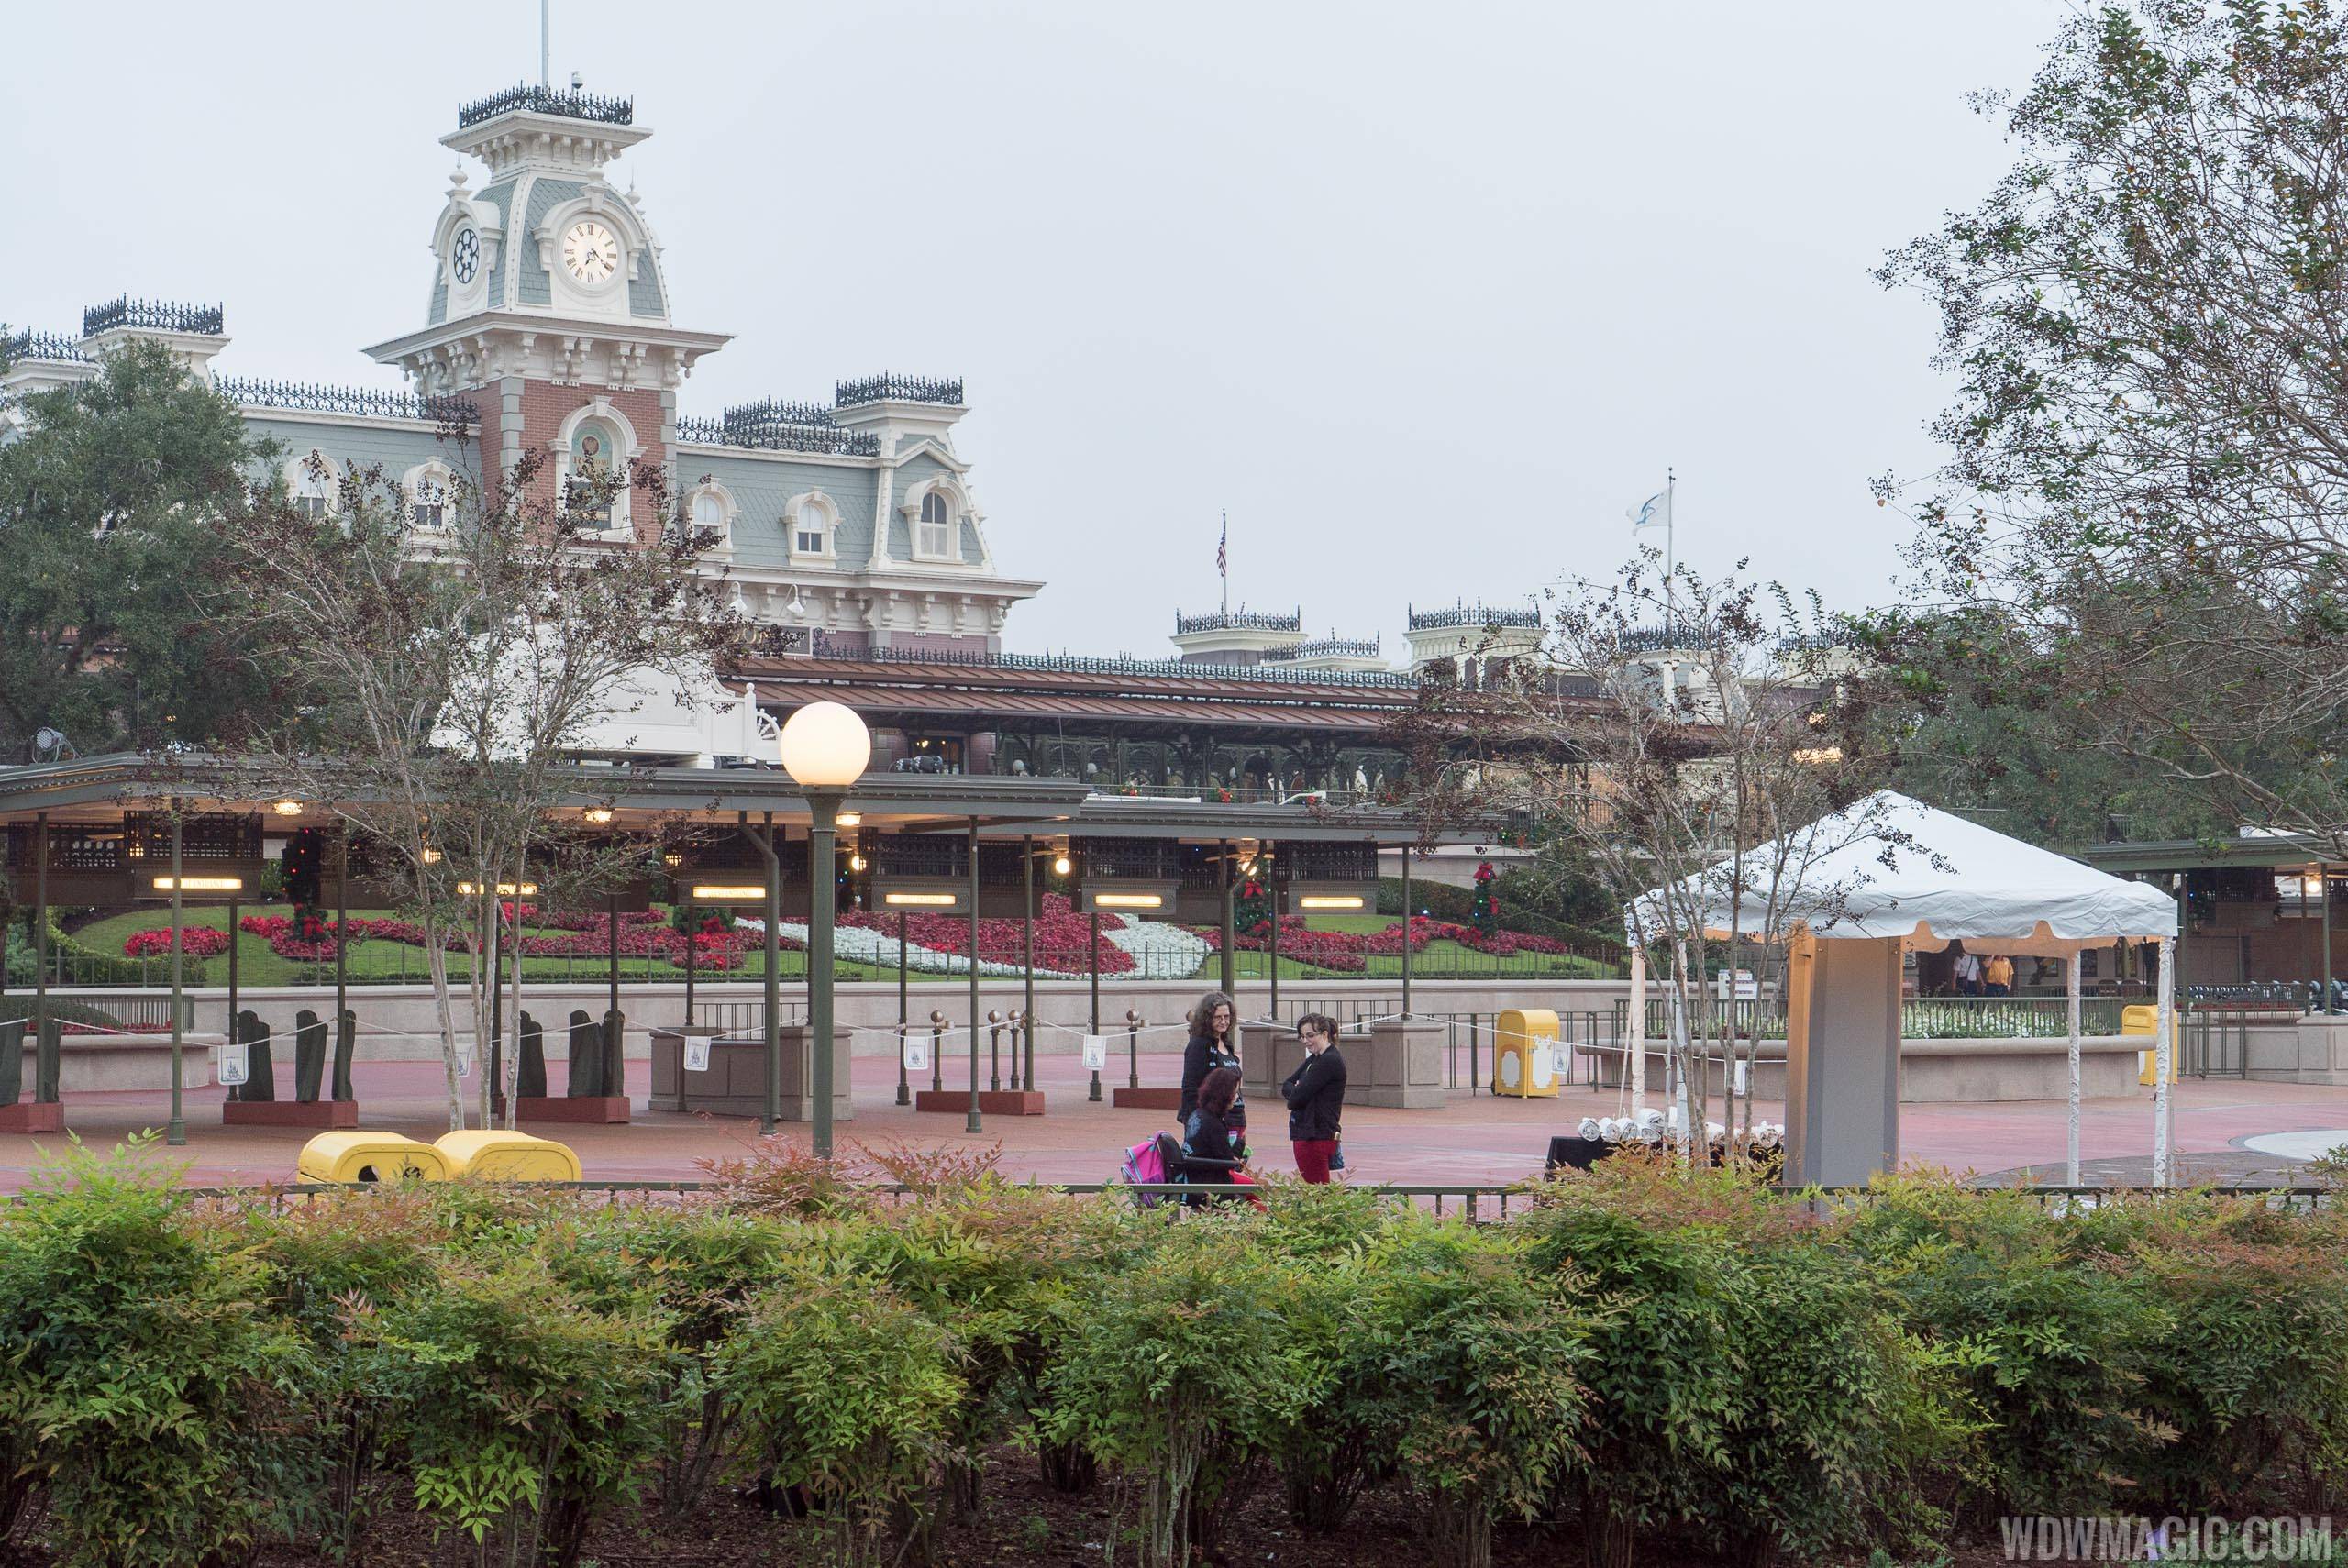 Magic Kingdom metal detectors and new entry policy